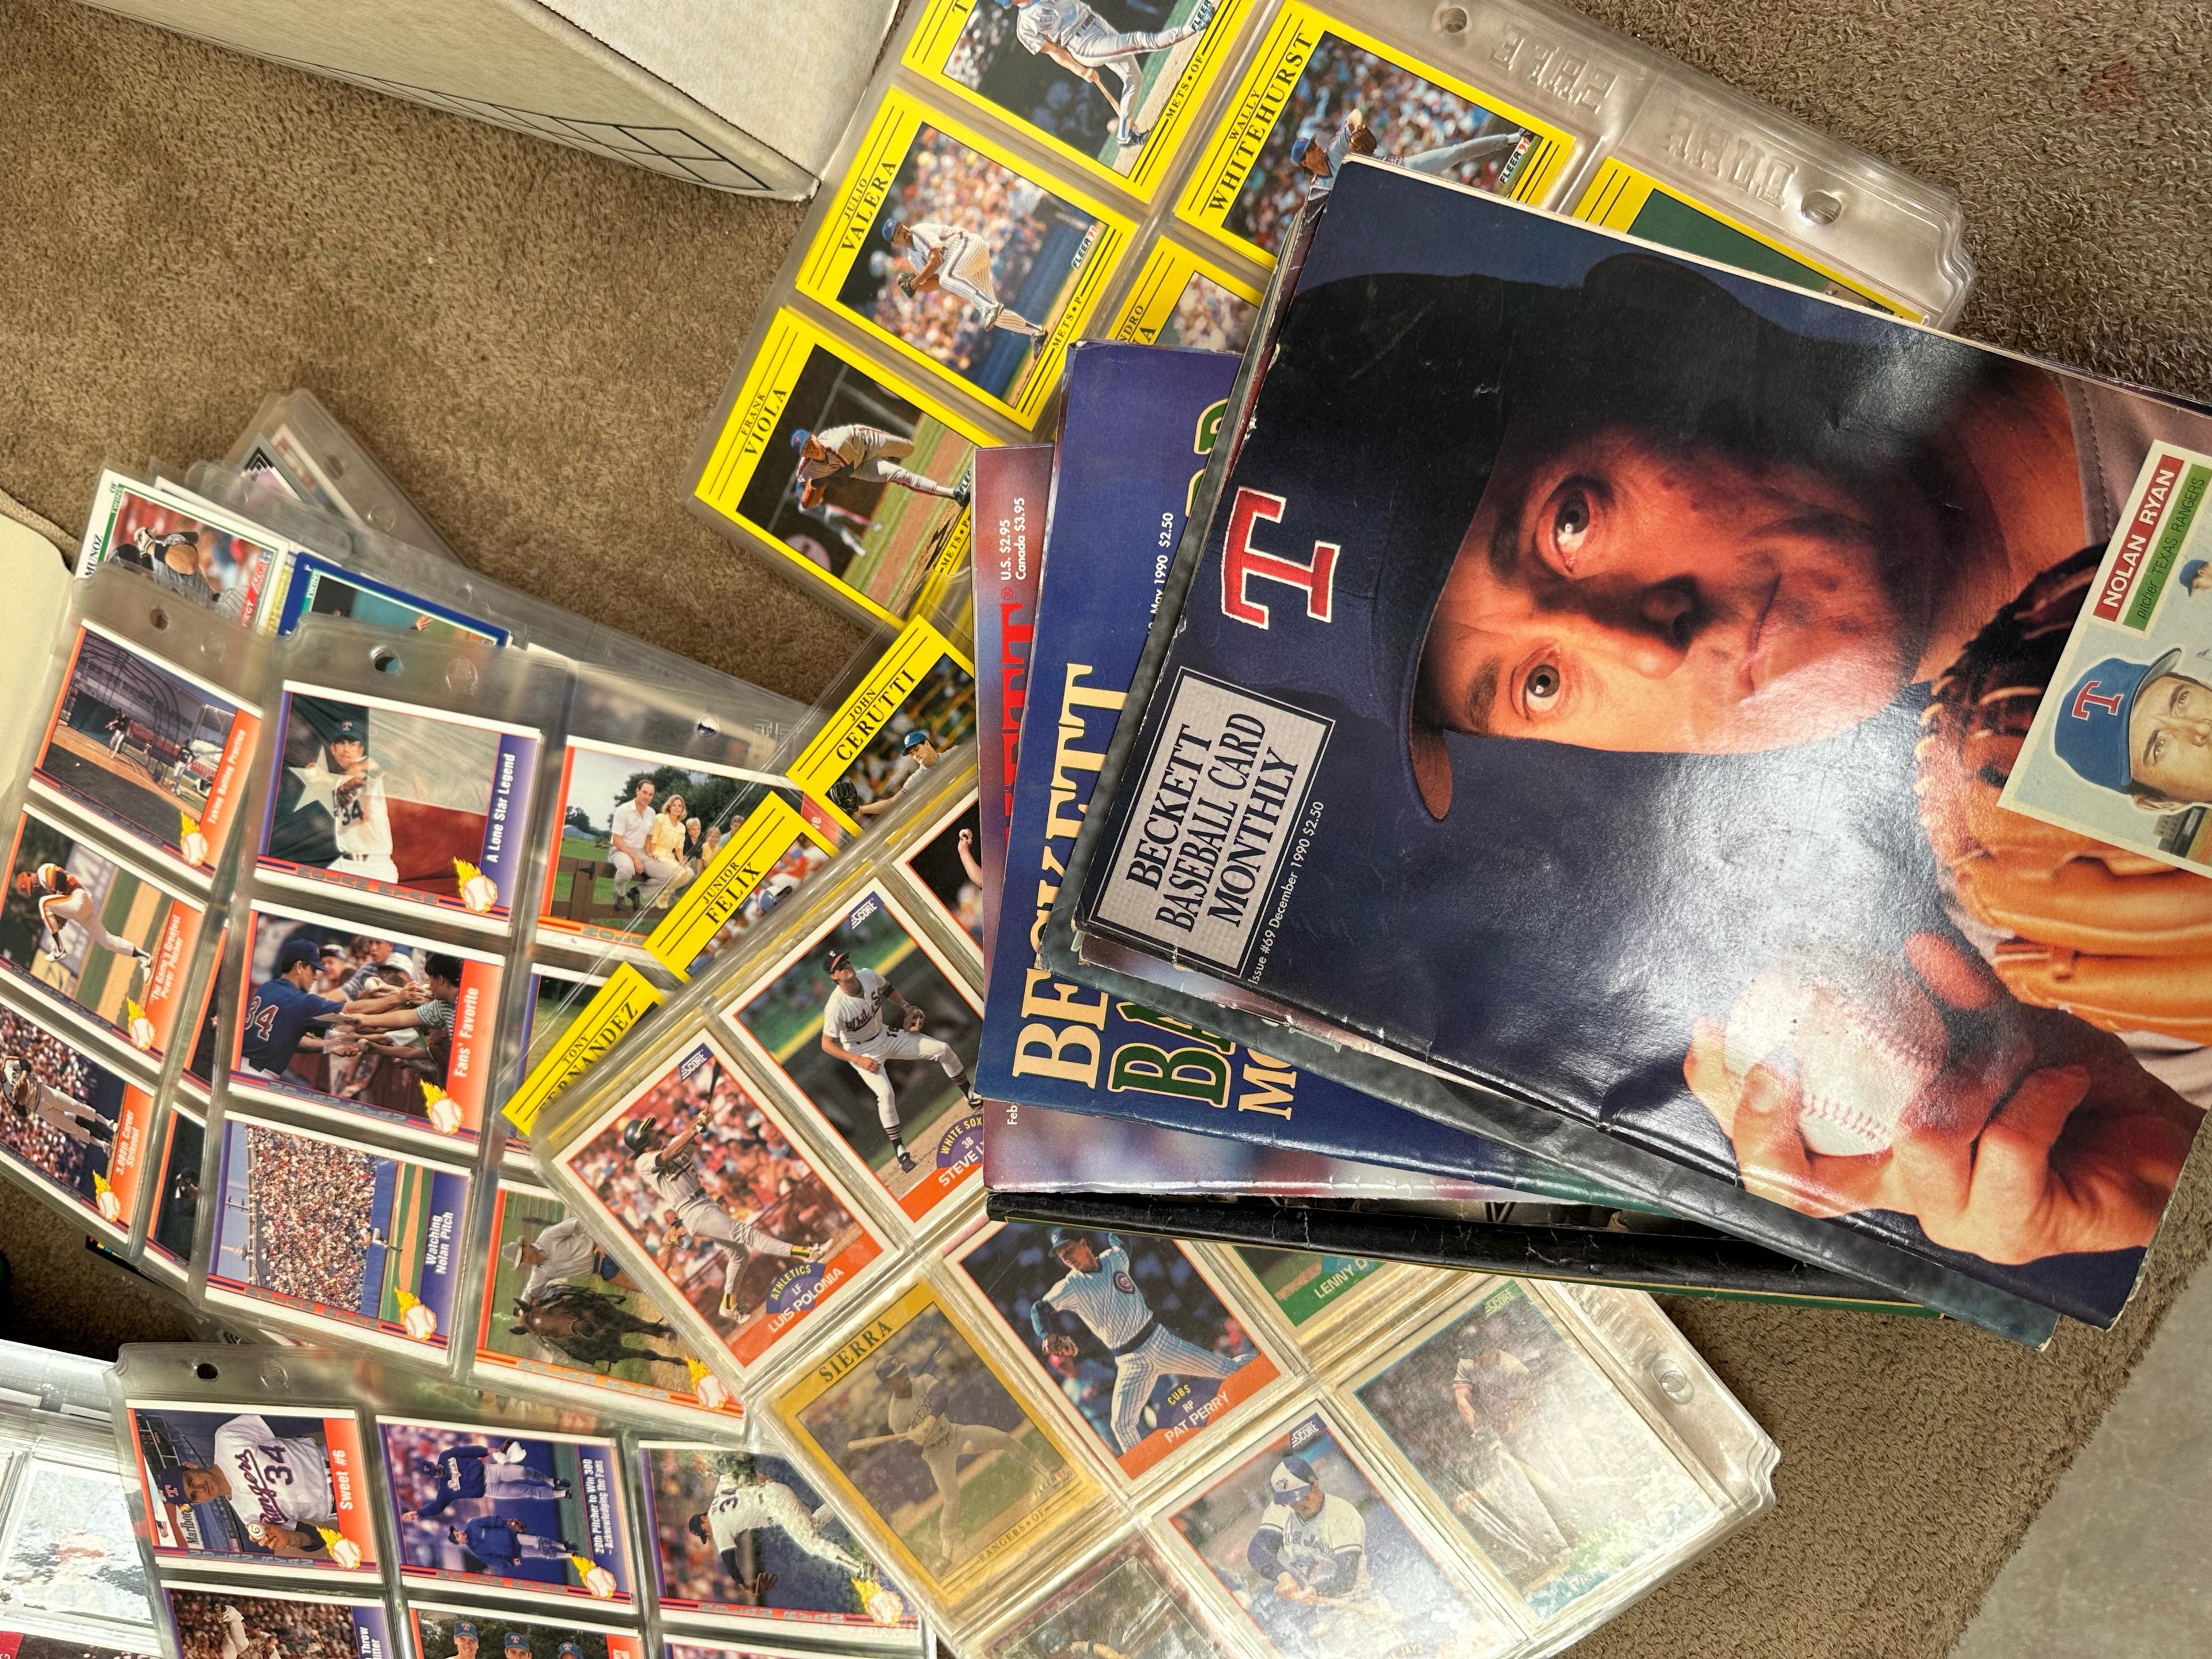 BECKETT BOOKS AND SHEETS OF BASEBALL CARDS